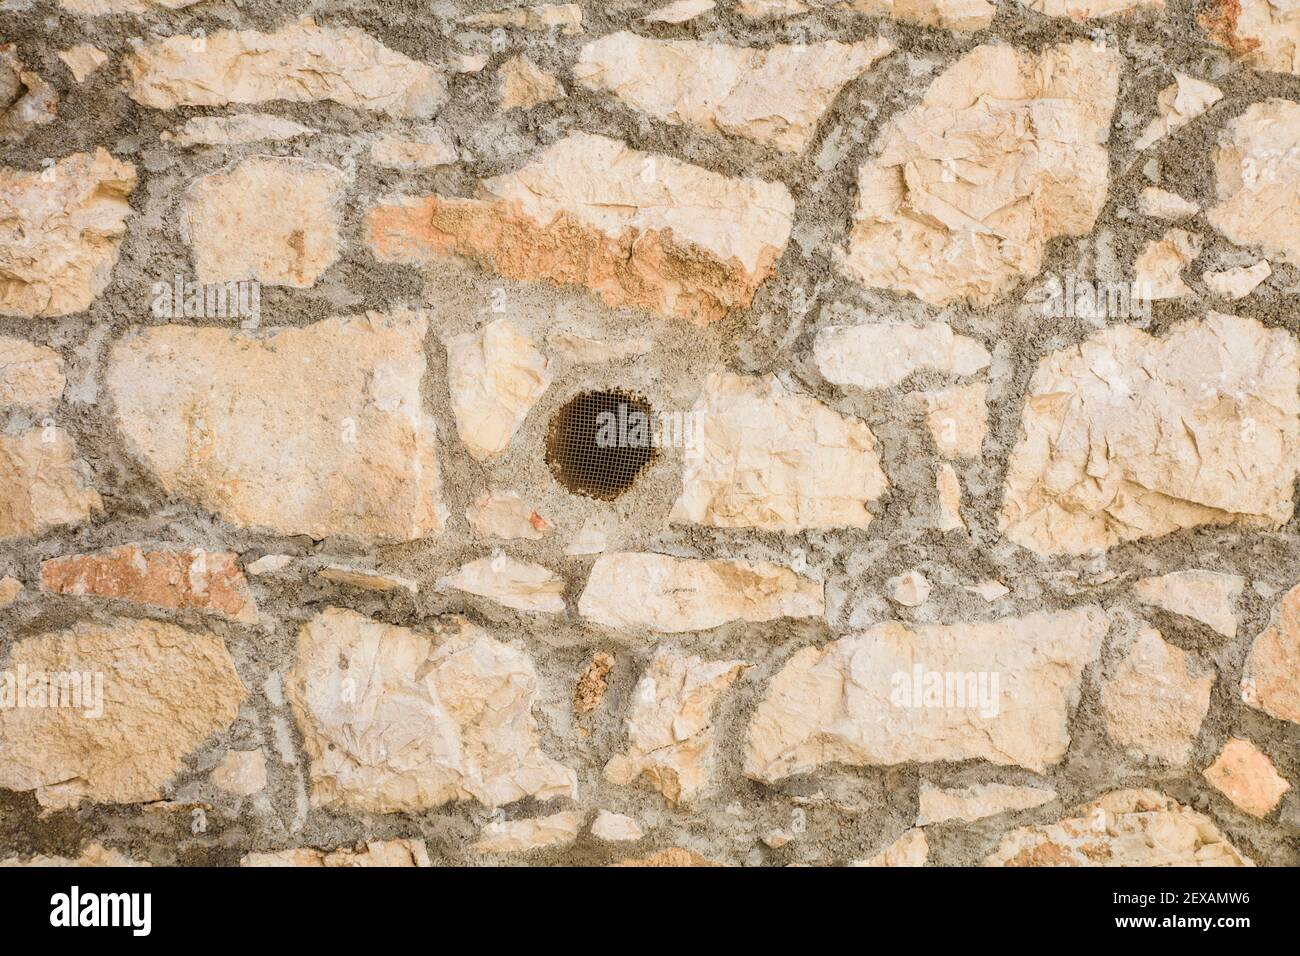 Stone built wall with a basic mesh air vent Stock Photo